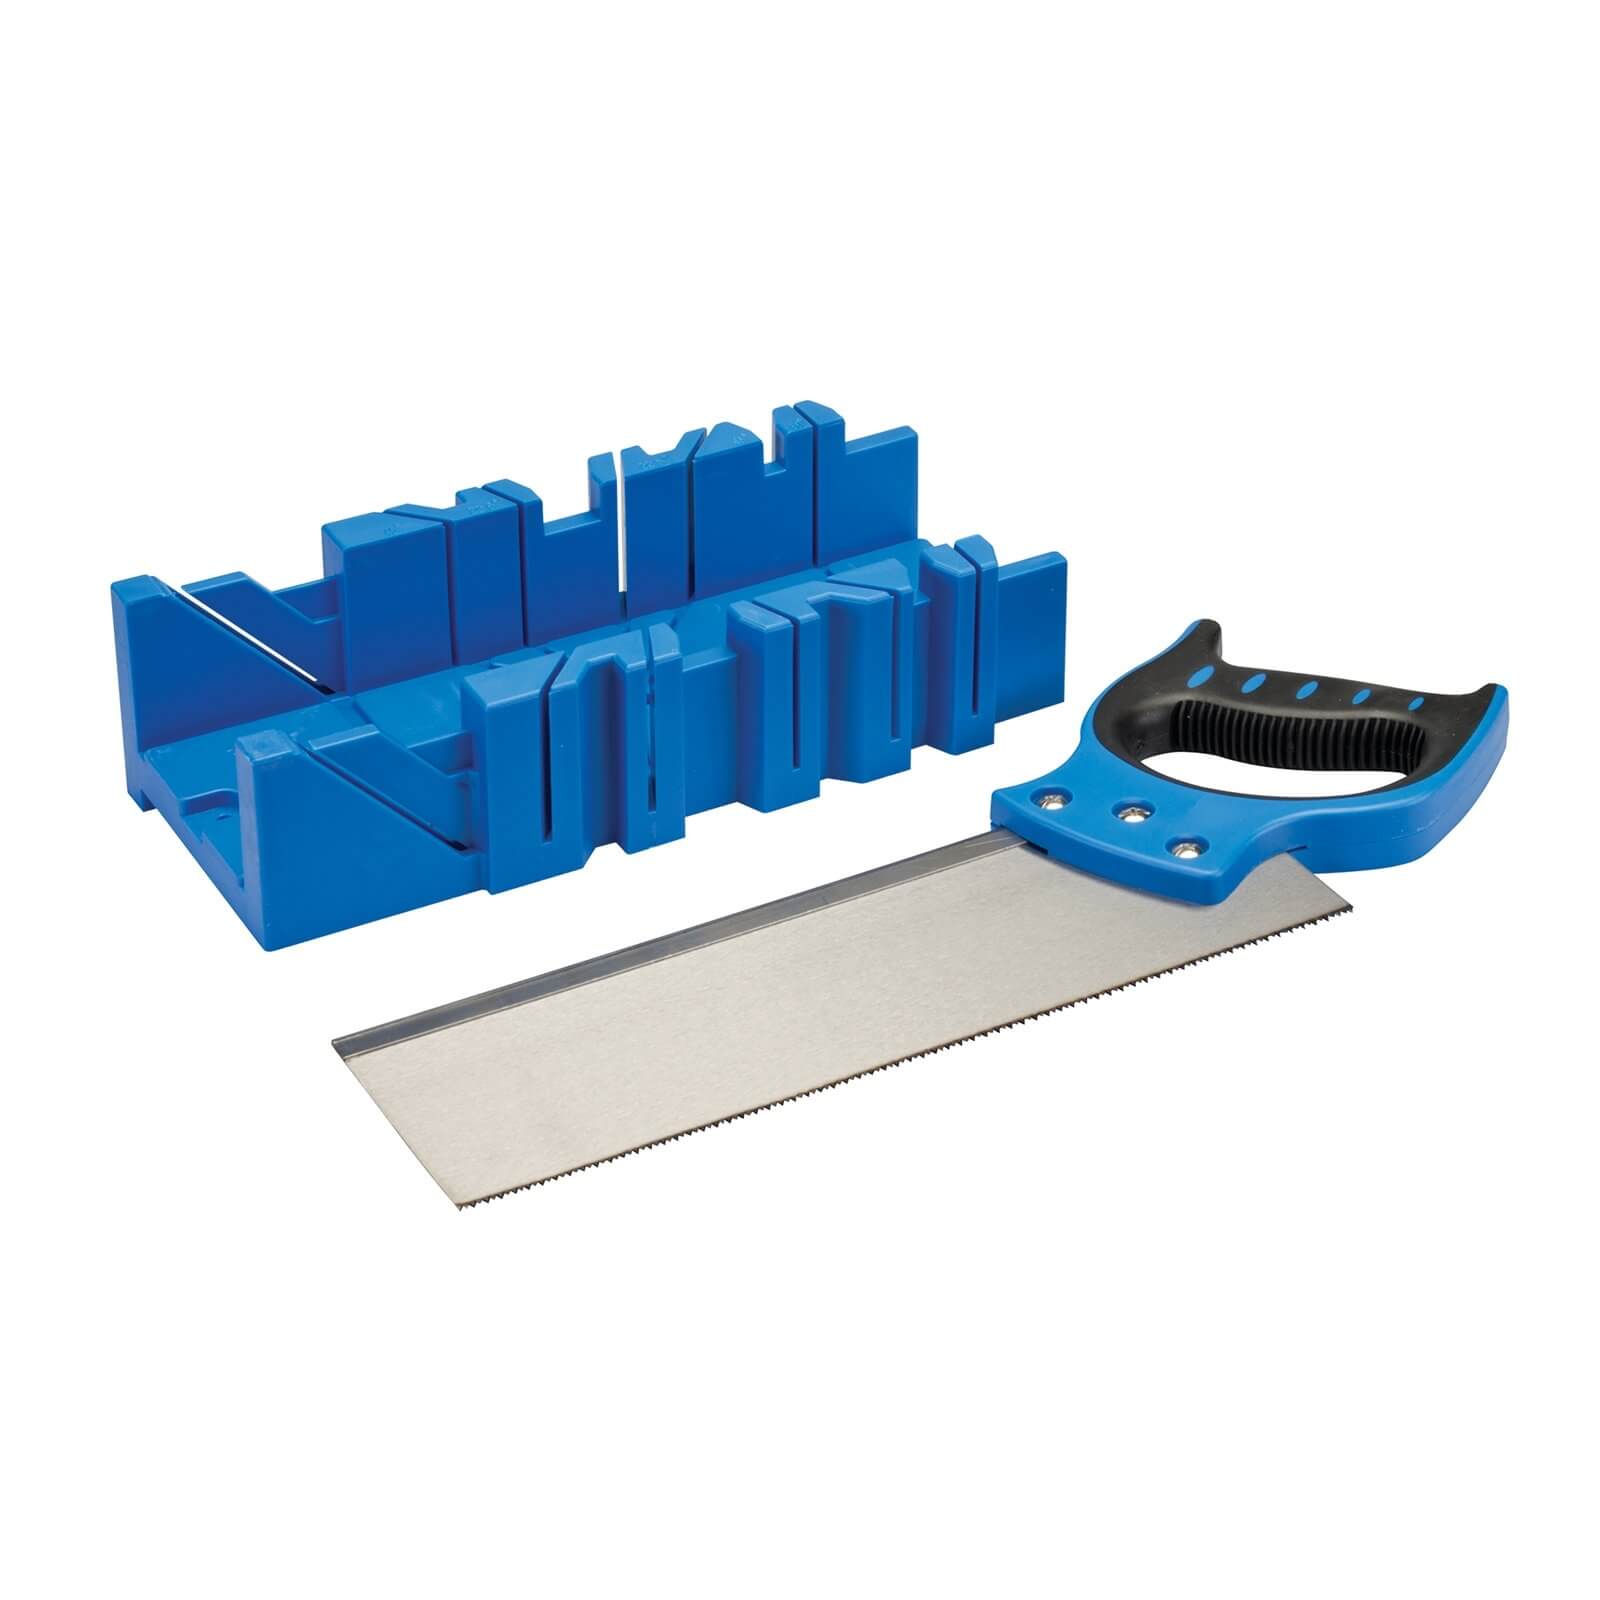 Photo of Silverline Expert Mitre Box & Saw 300 X 90mm